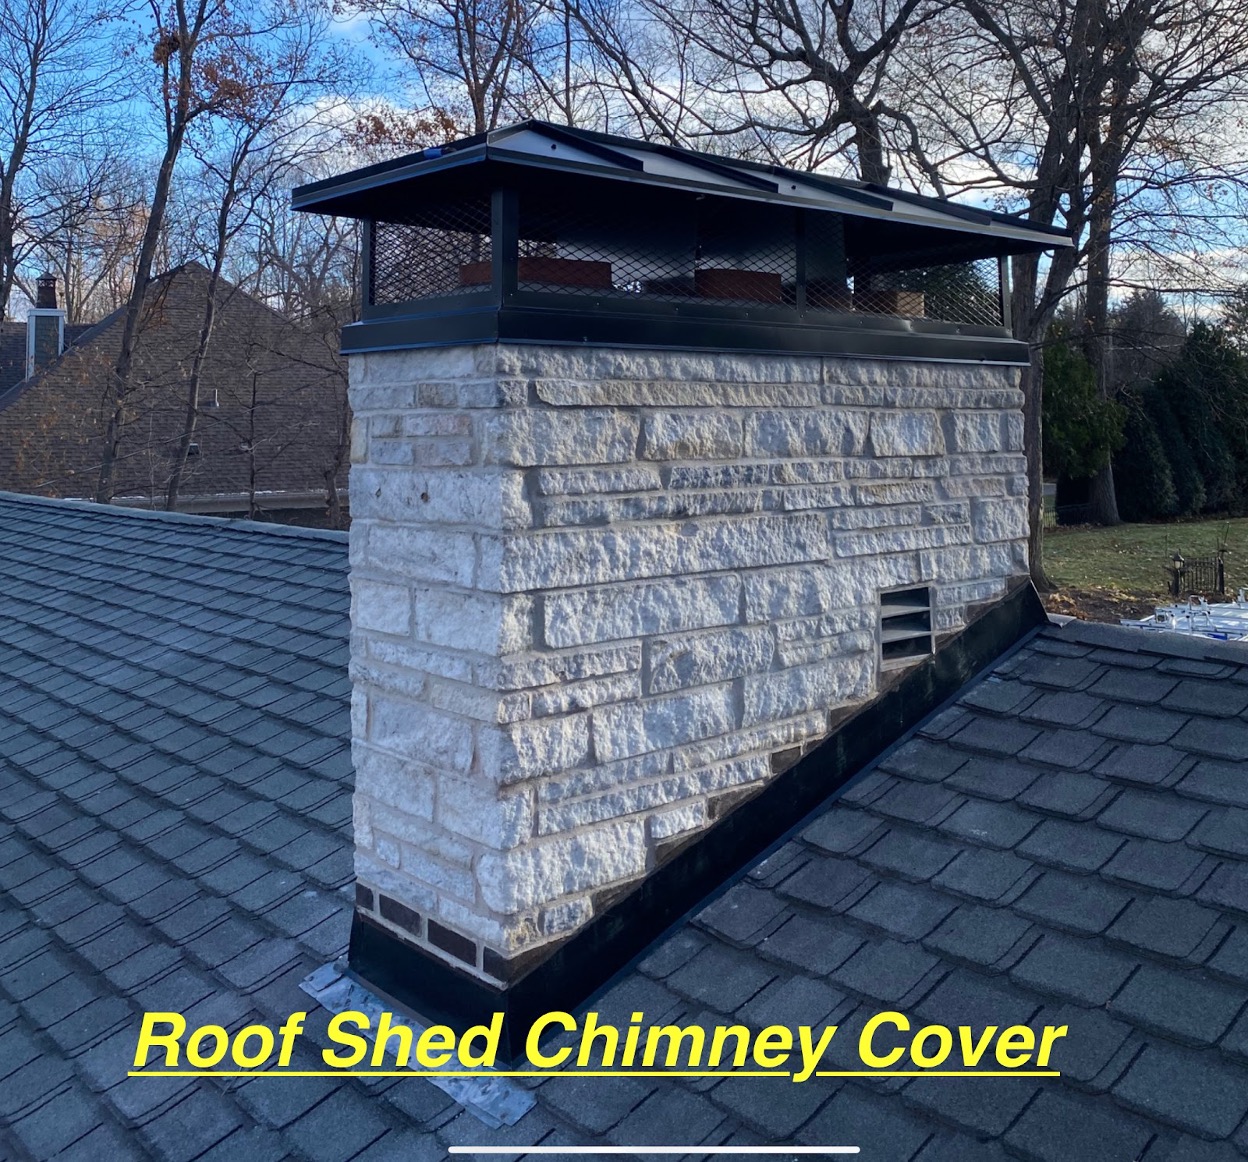 Roof shed chimney cover